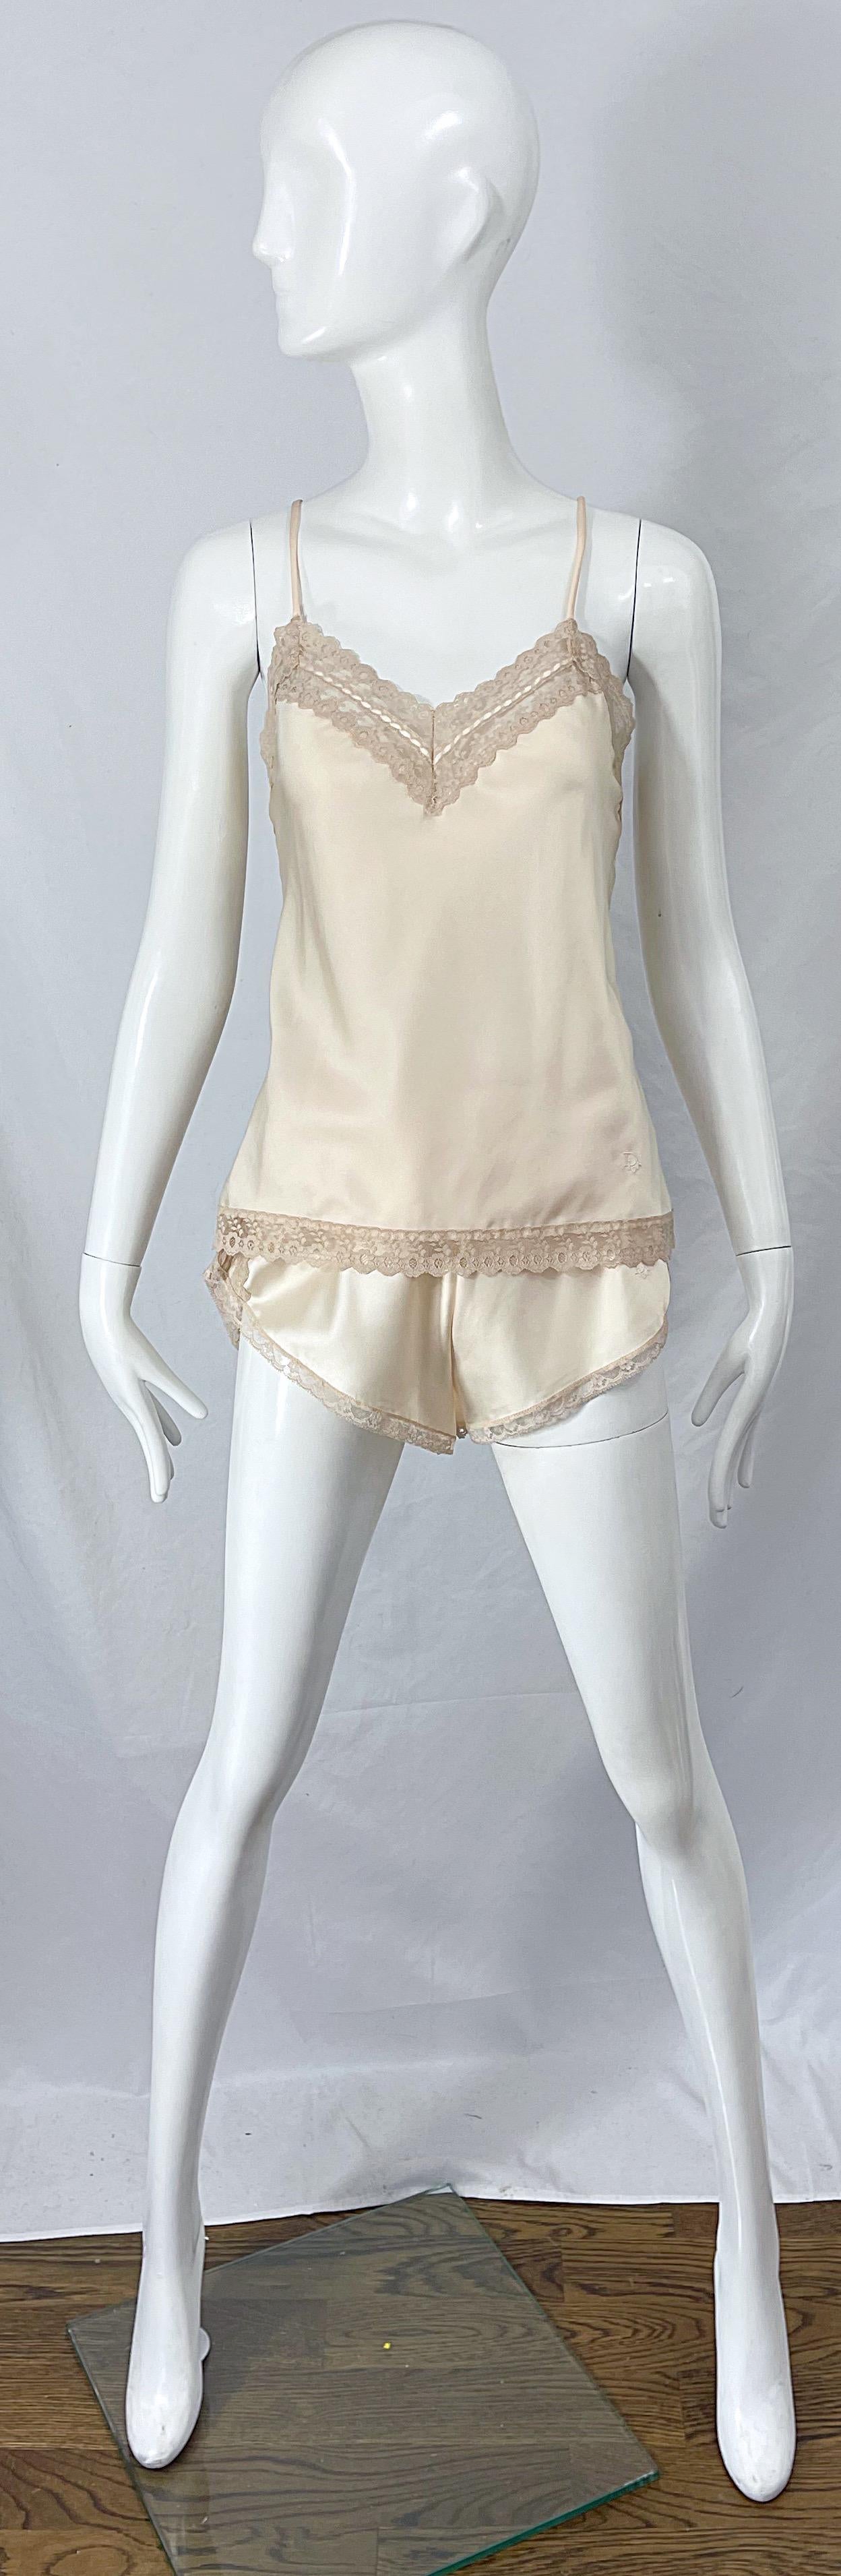 NWT 1980s Christian Dior Ivory Satin Lace Three Piece Cami 80s Lingerie PJ Set  For Sale 12